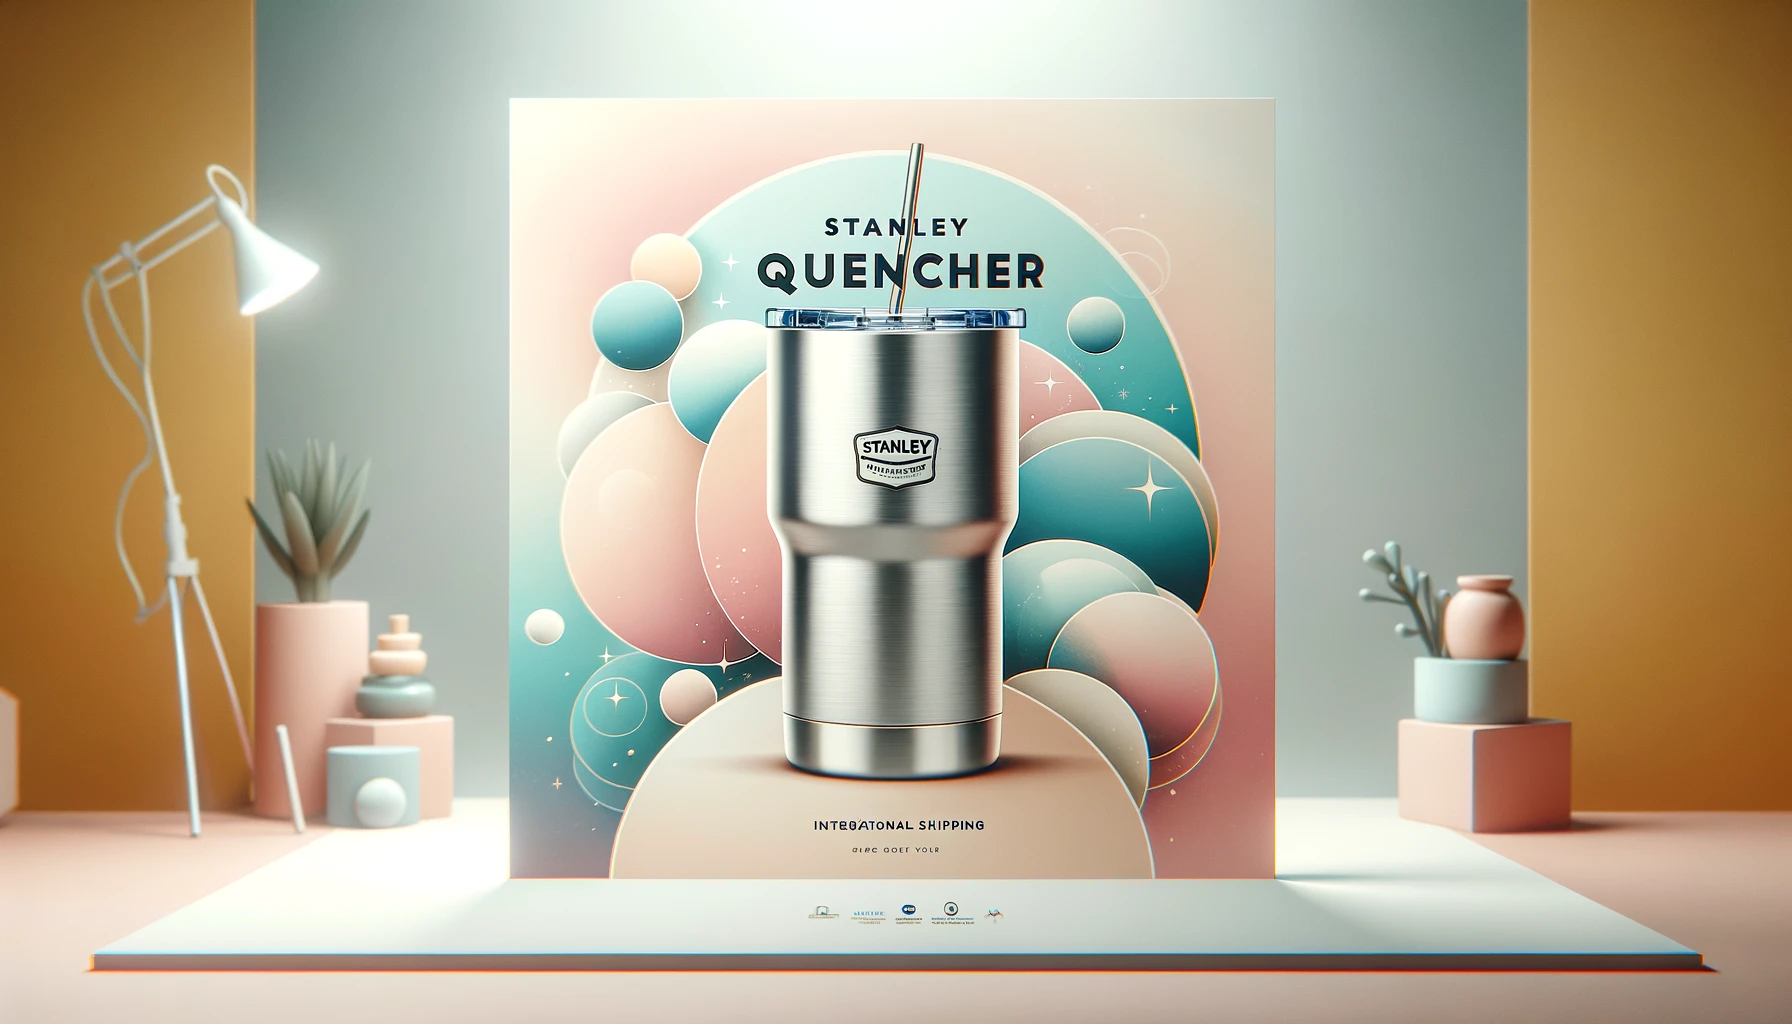 Stanley Quencher: How to Get It Worldwide from Canada